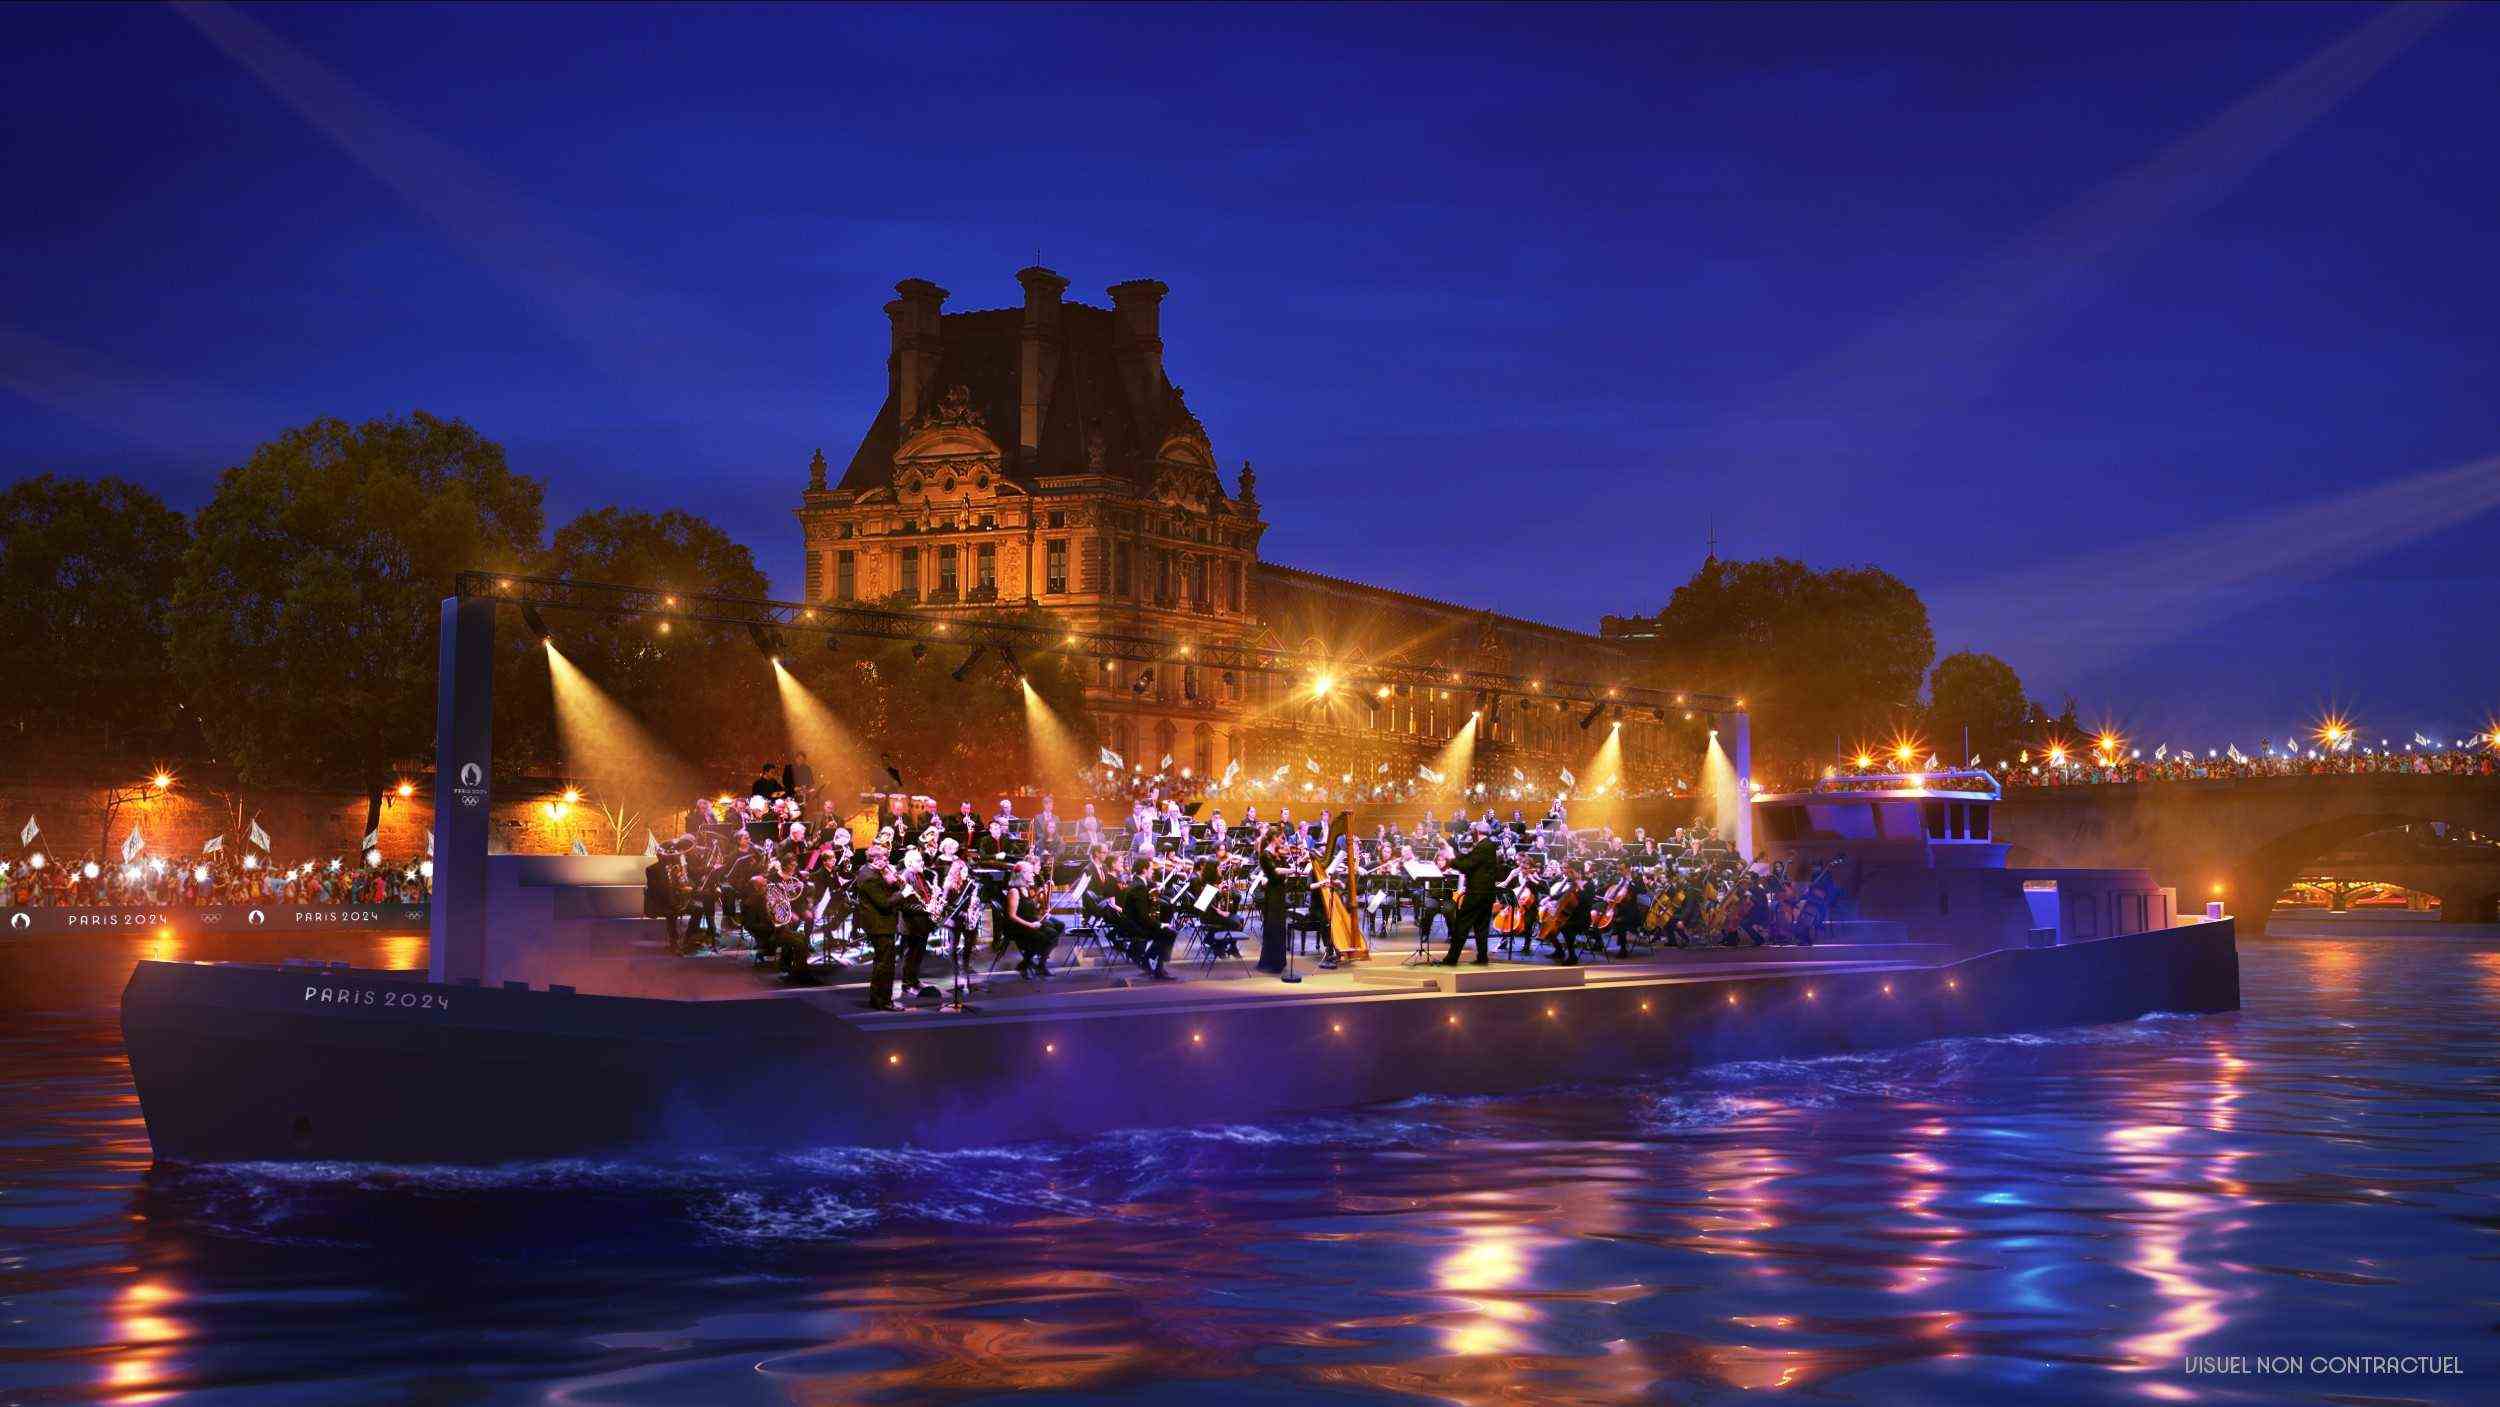 https://allnewspress.com/wp-content/uploads/2021/12/1639430979_892_The-Seine-at-the-heart-of-celebration-the-opening-ceremony.jpg